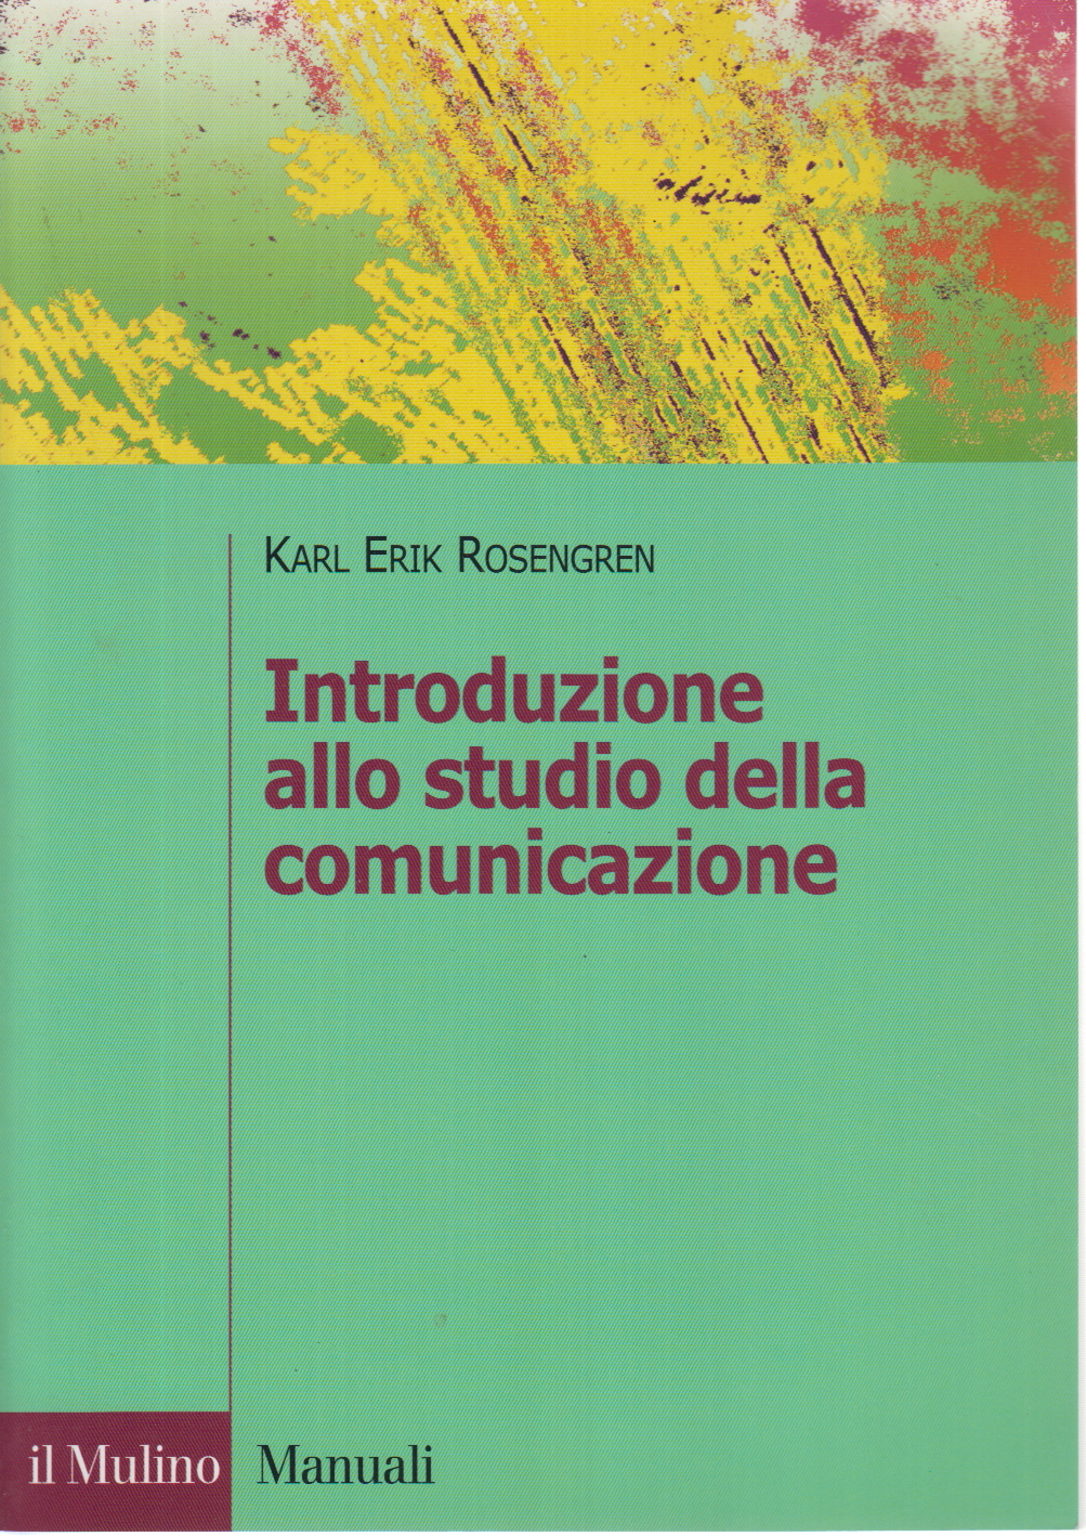 Introduction to the study of communication